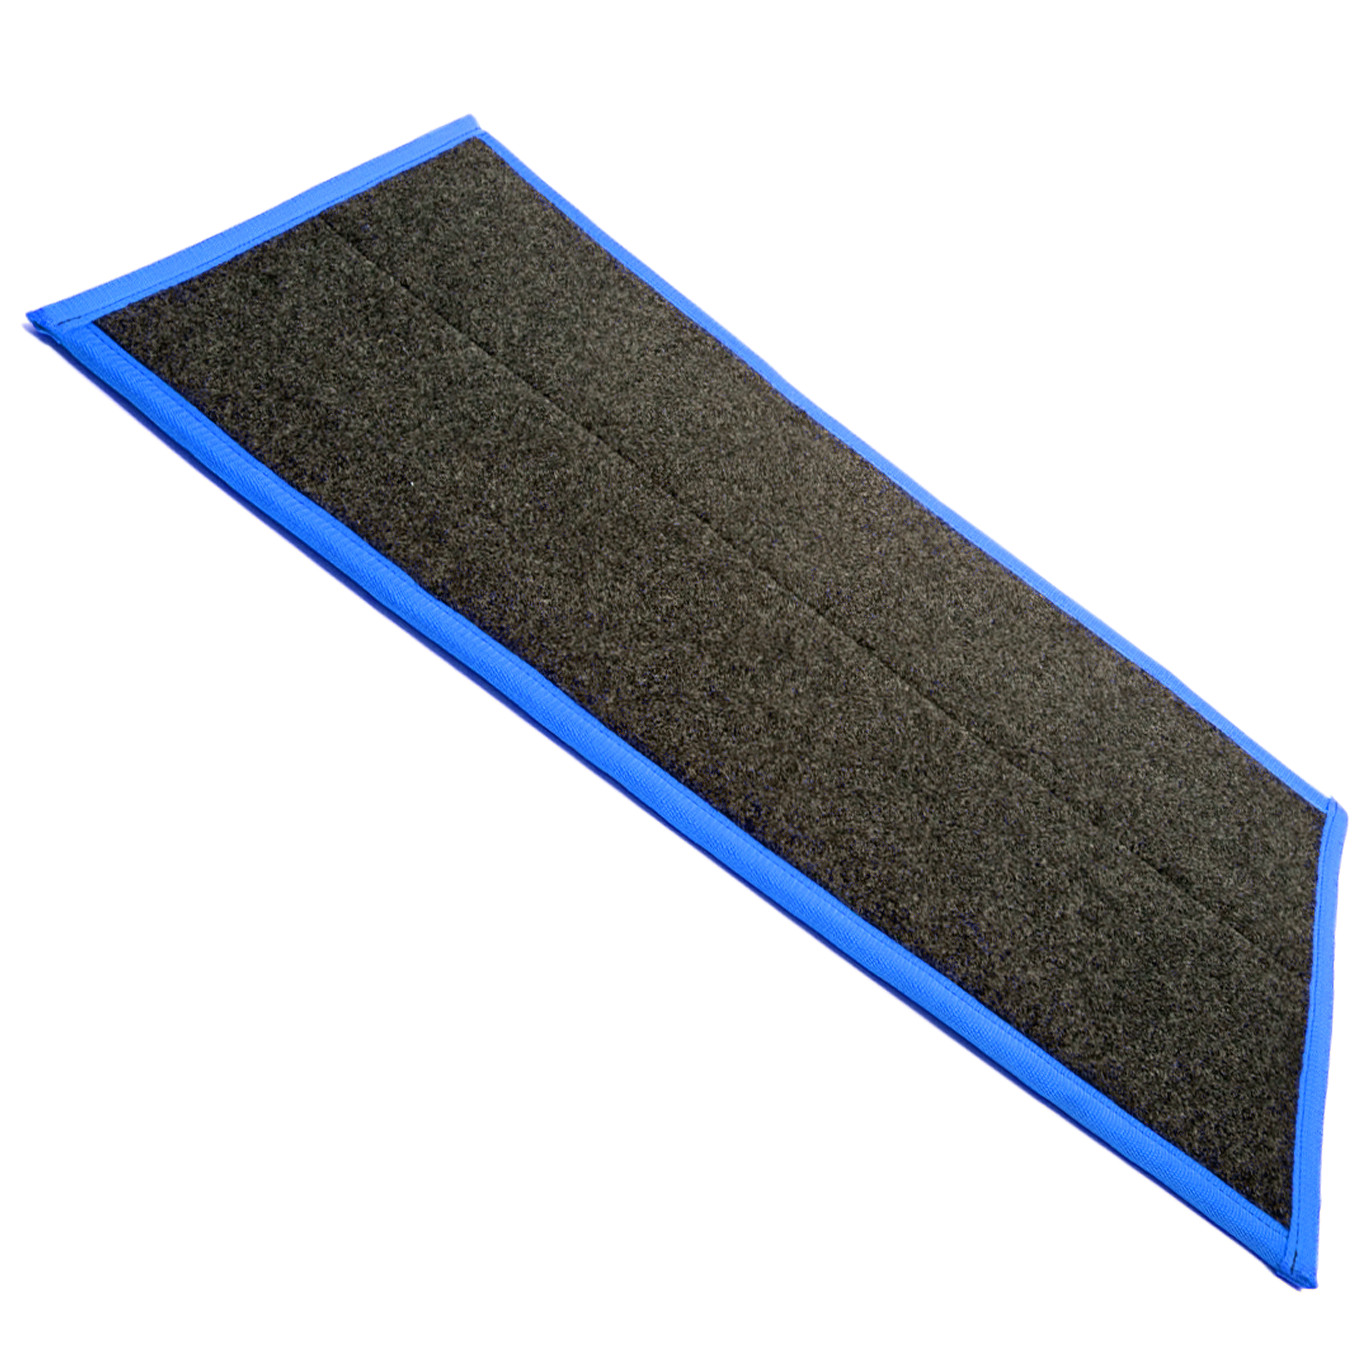 Ask a question about PureTrack Replacement Pad with Blue Trim. Disinfecting Shoe Mat System.